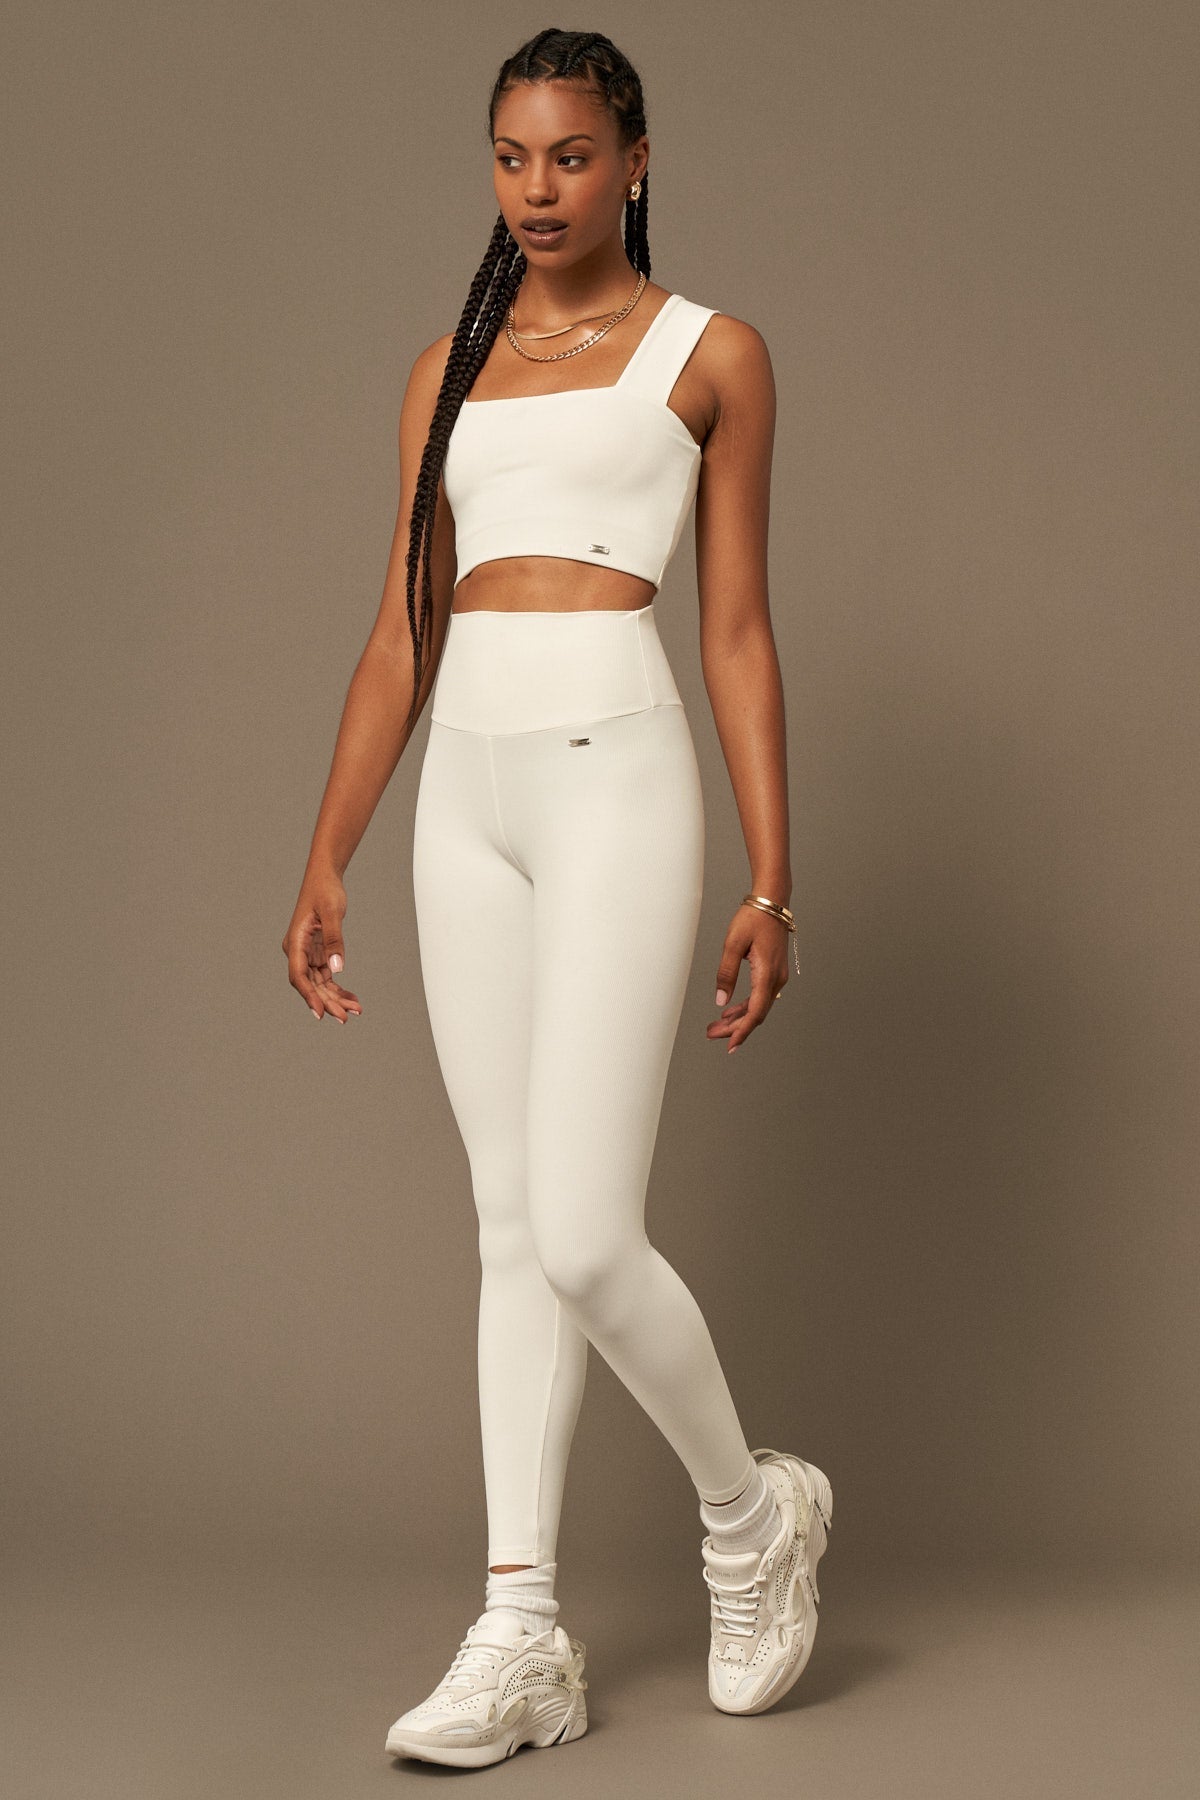 Daily Legging in Pearl White-Long Leggings-Store Clothing Sustainable Recycled Yoga Leggings Women On-line Barcelona Believe Athletics Sustainable Recycled Yoga Clothes